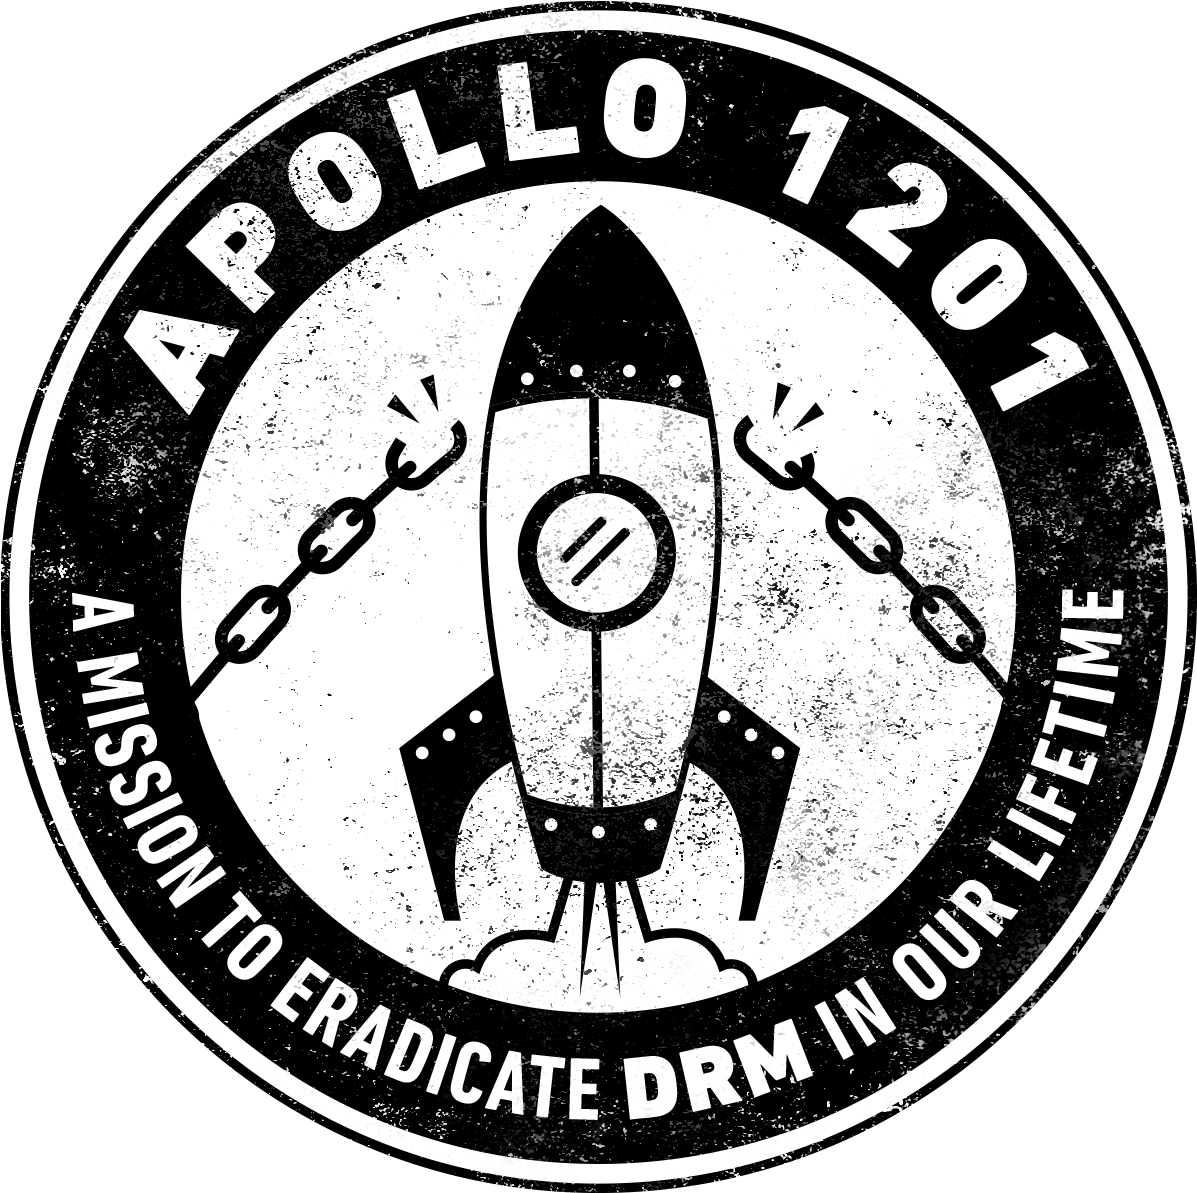 A Black And White Logo With A Rocket And Chain